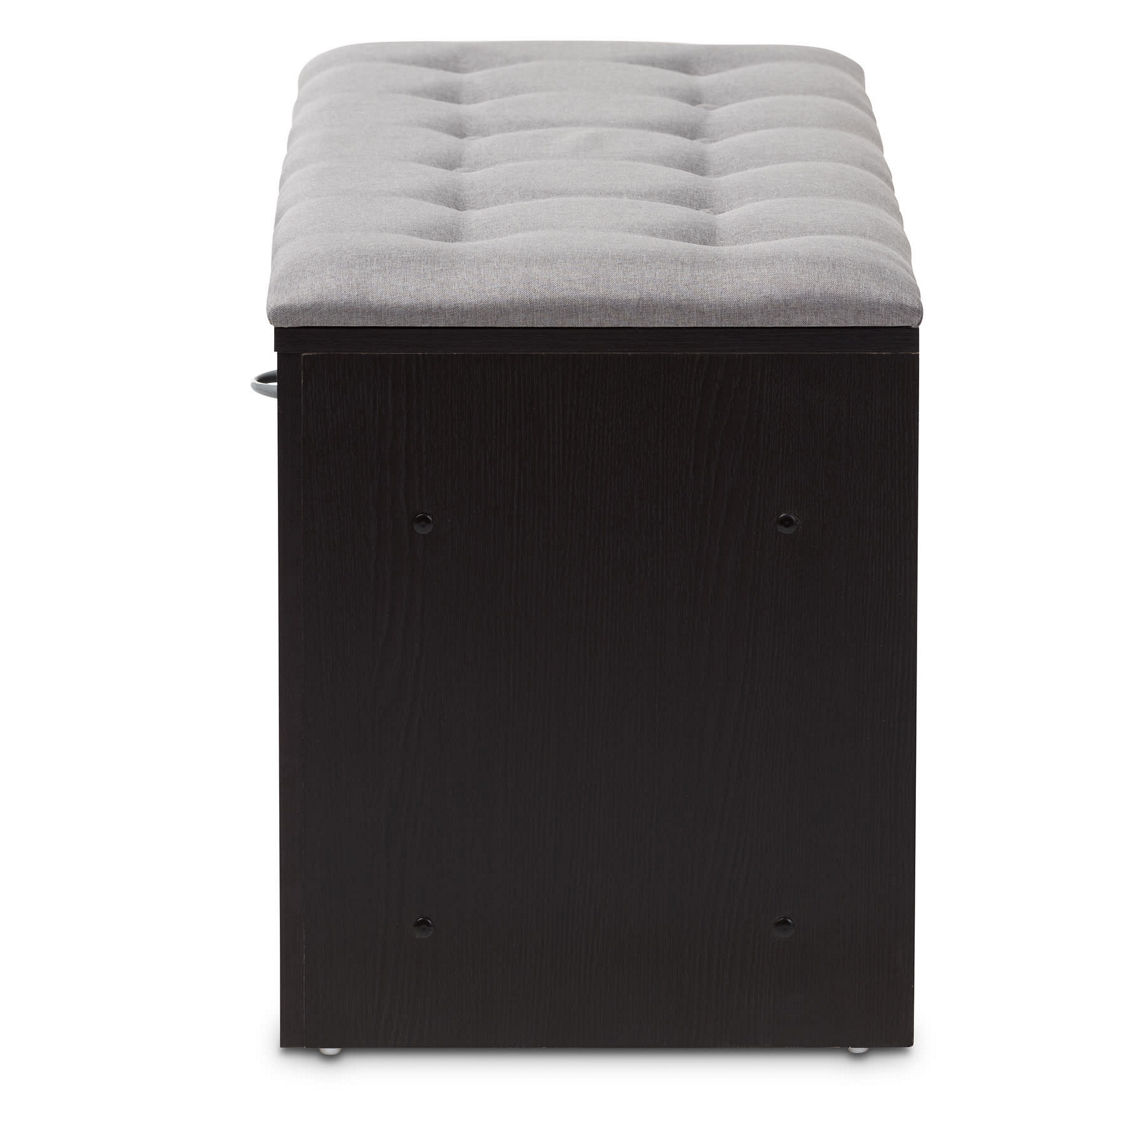 Baxton Studio Espresso Finished Grey Fabric Upholstered Cushioned Entryway Bench - Image 4 of 5